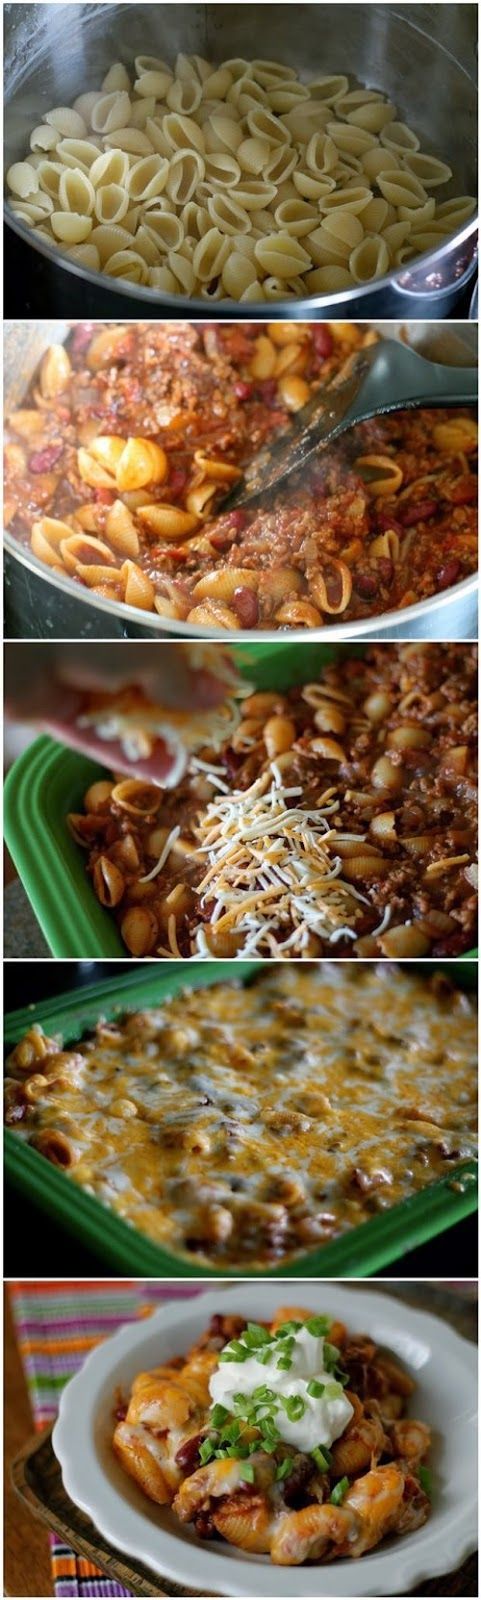 Chili Pasta Bake ~ Perfect for chilly weather :)